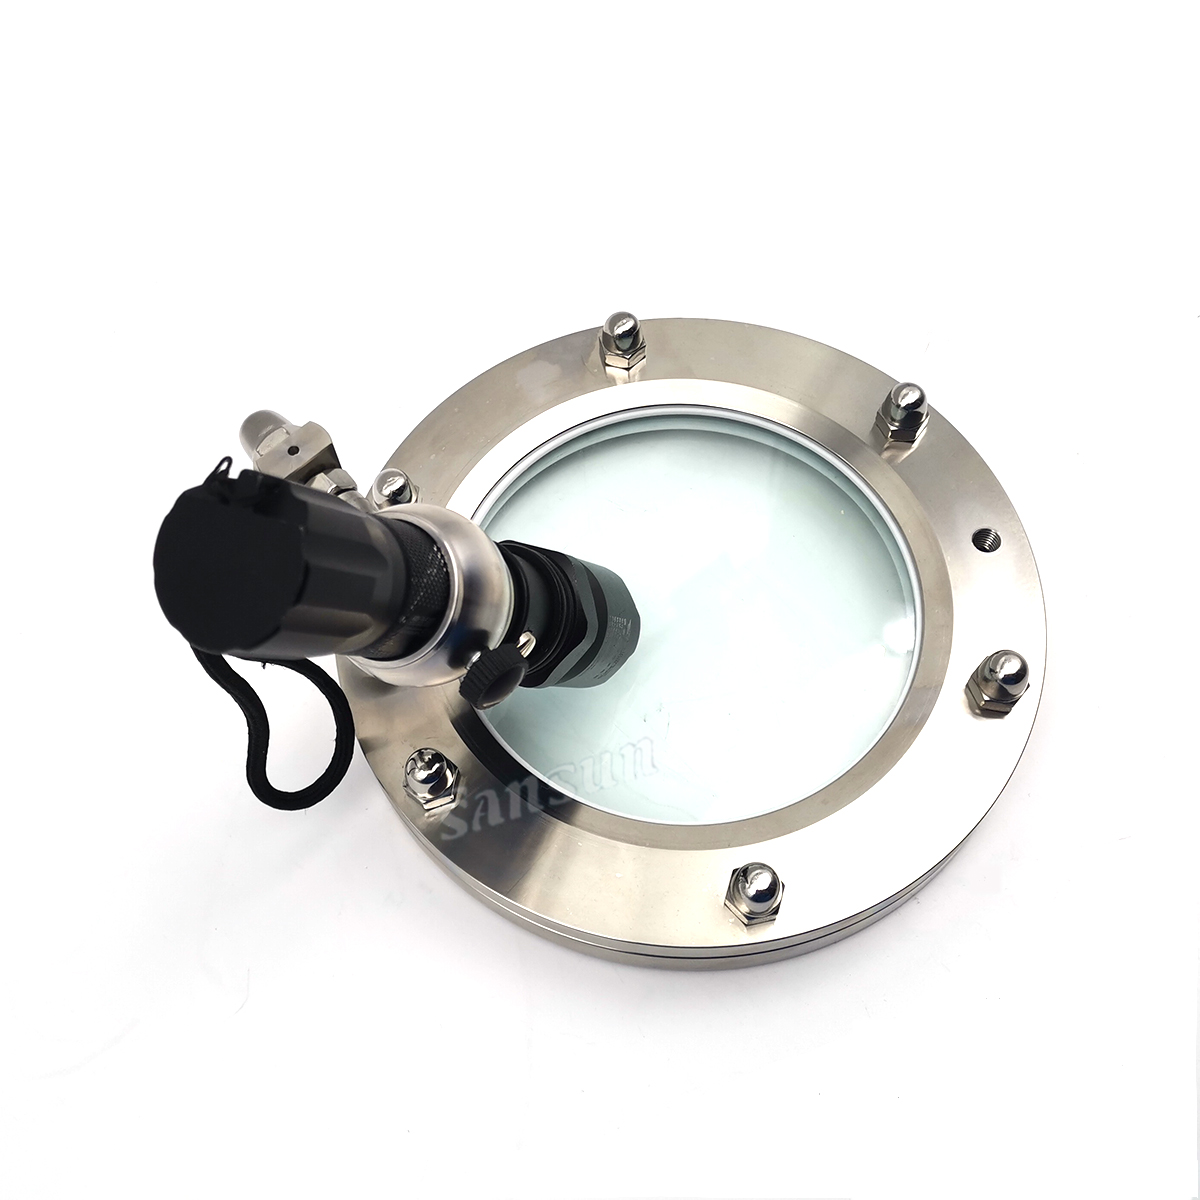 SS Sanitary Flange Sight Glass with Light for tank